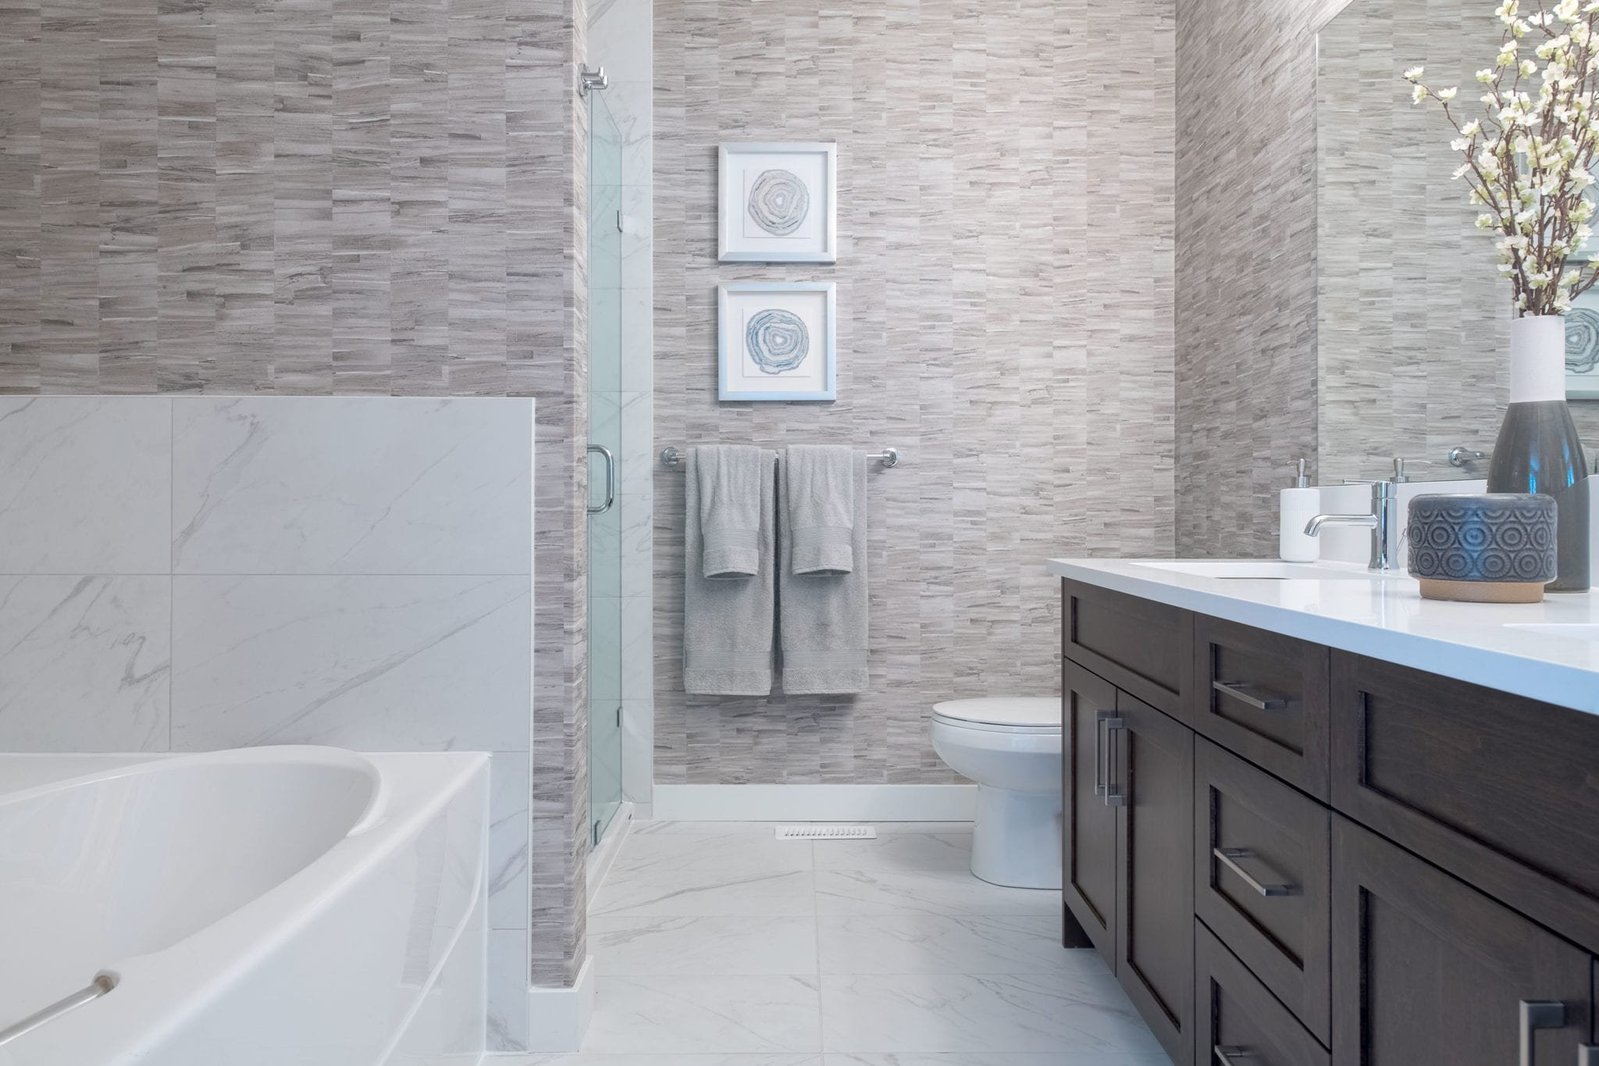 Bathrooms feature deep soaker tubs, Shaker cabinetry, quartz countertops, and chrome faucets.